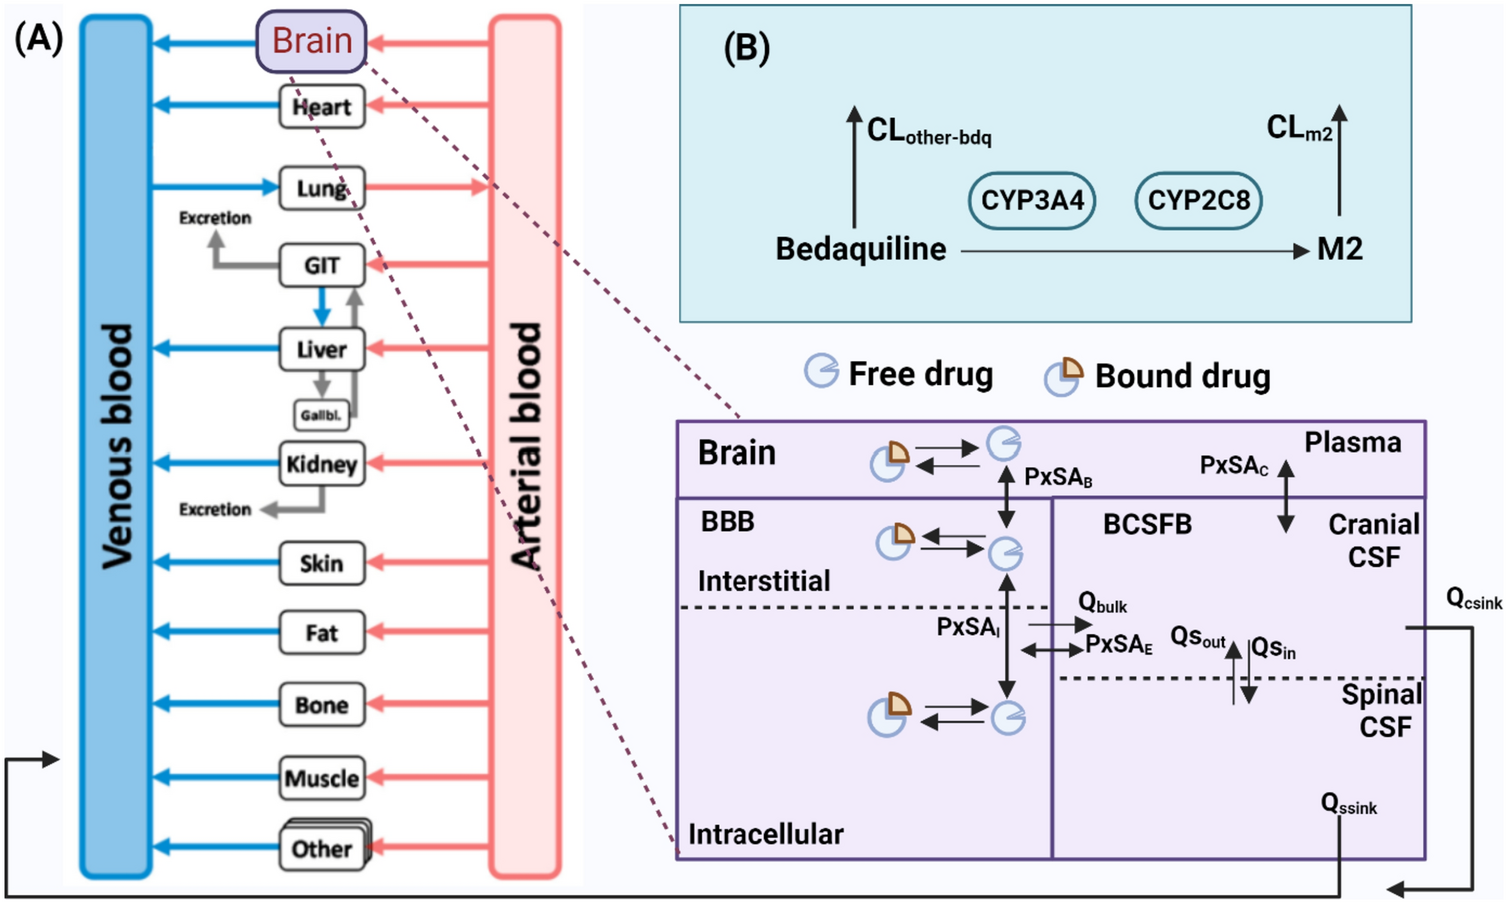 Predictions of Bedaquiline Central Nervous System Exposure in Patients with Tuberculosis Meningitis Using Physiologically based Pharmacokinetic Modeling